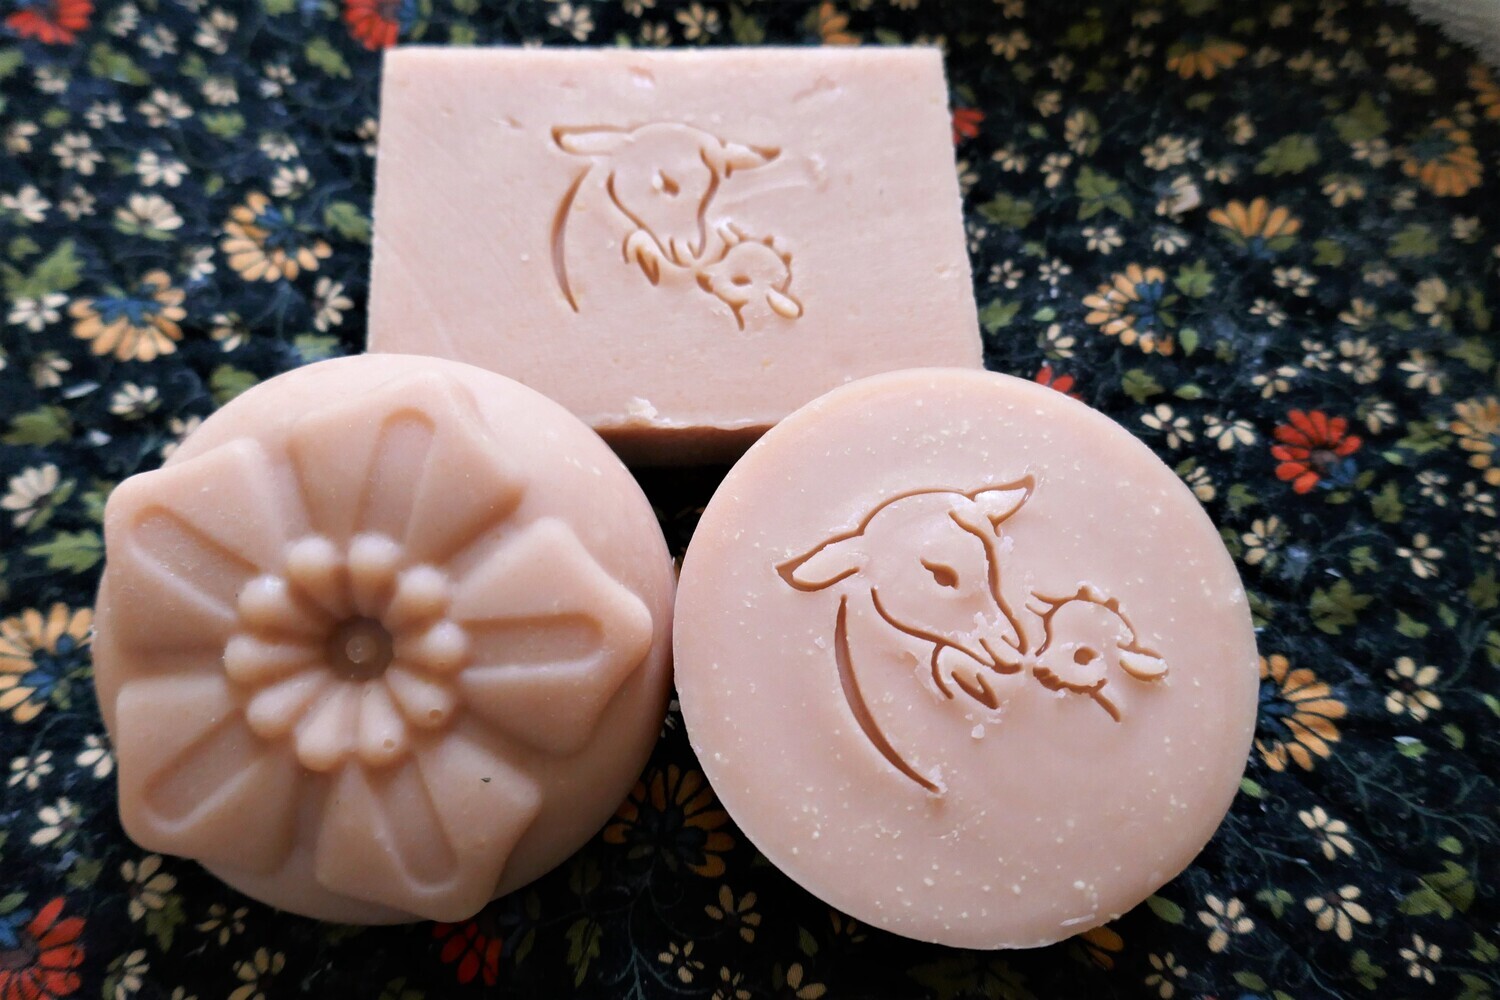 "Mona Lisa" colostrum soap - fragrant, rich and creamy, luxurious.